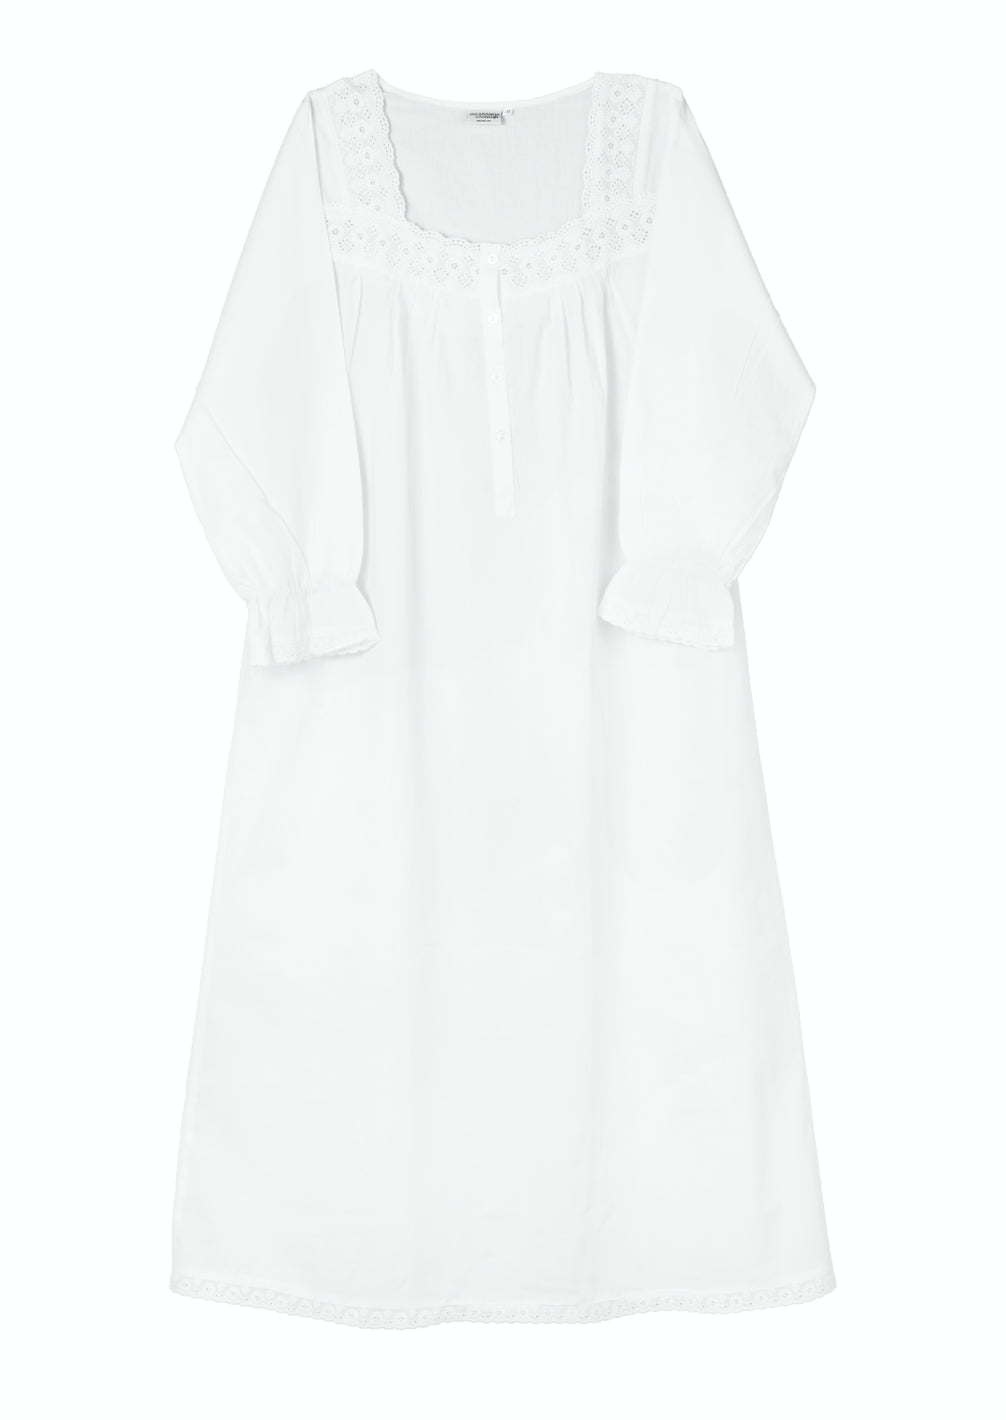 The | Over White Nightgown Cotton Sleeve Susan Moon Long